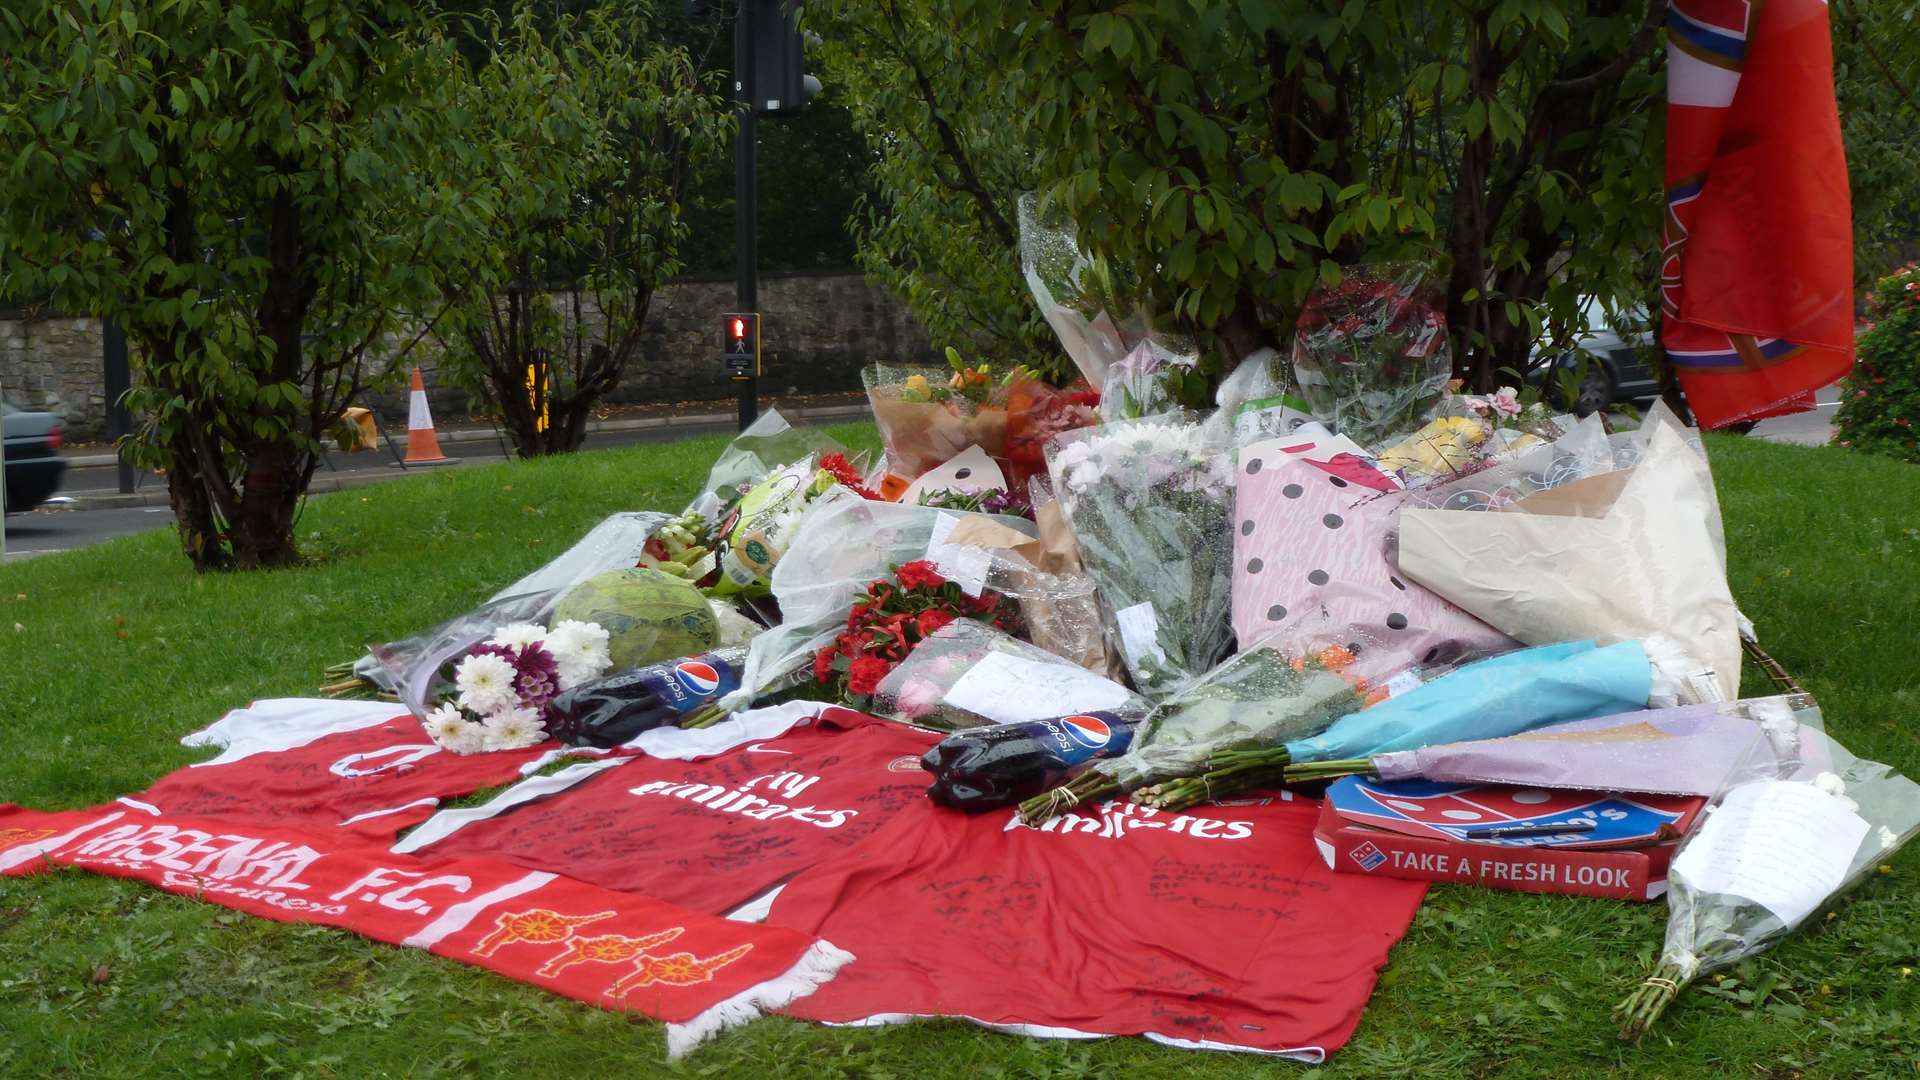 Tributes for Danyl were left at the scene of the crash